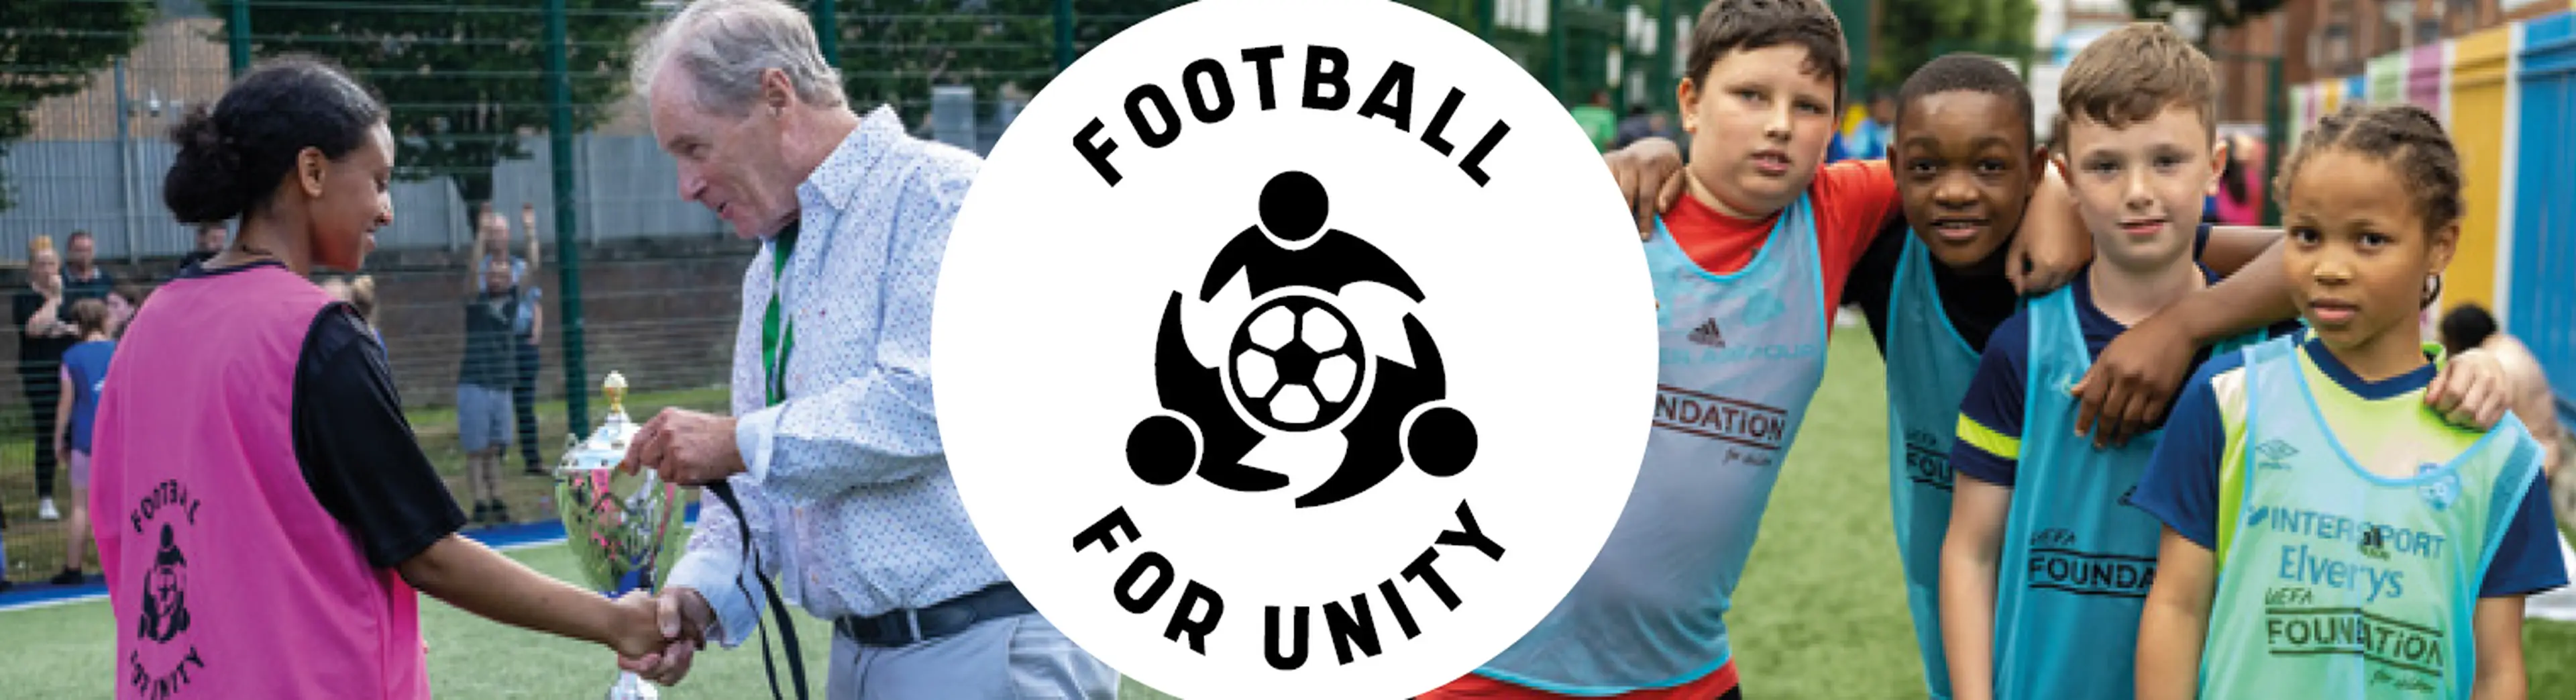 SARI Football for Unity event poster Image